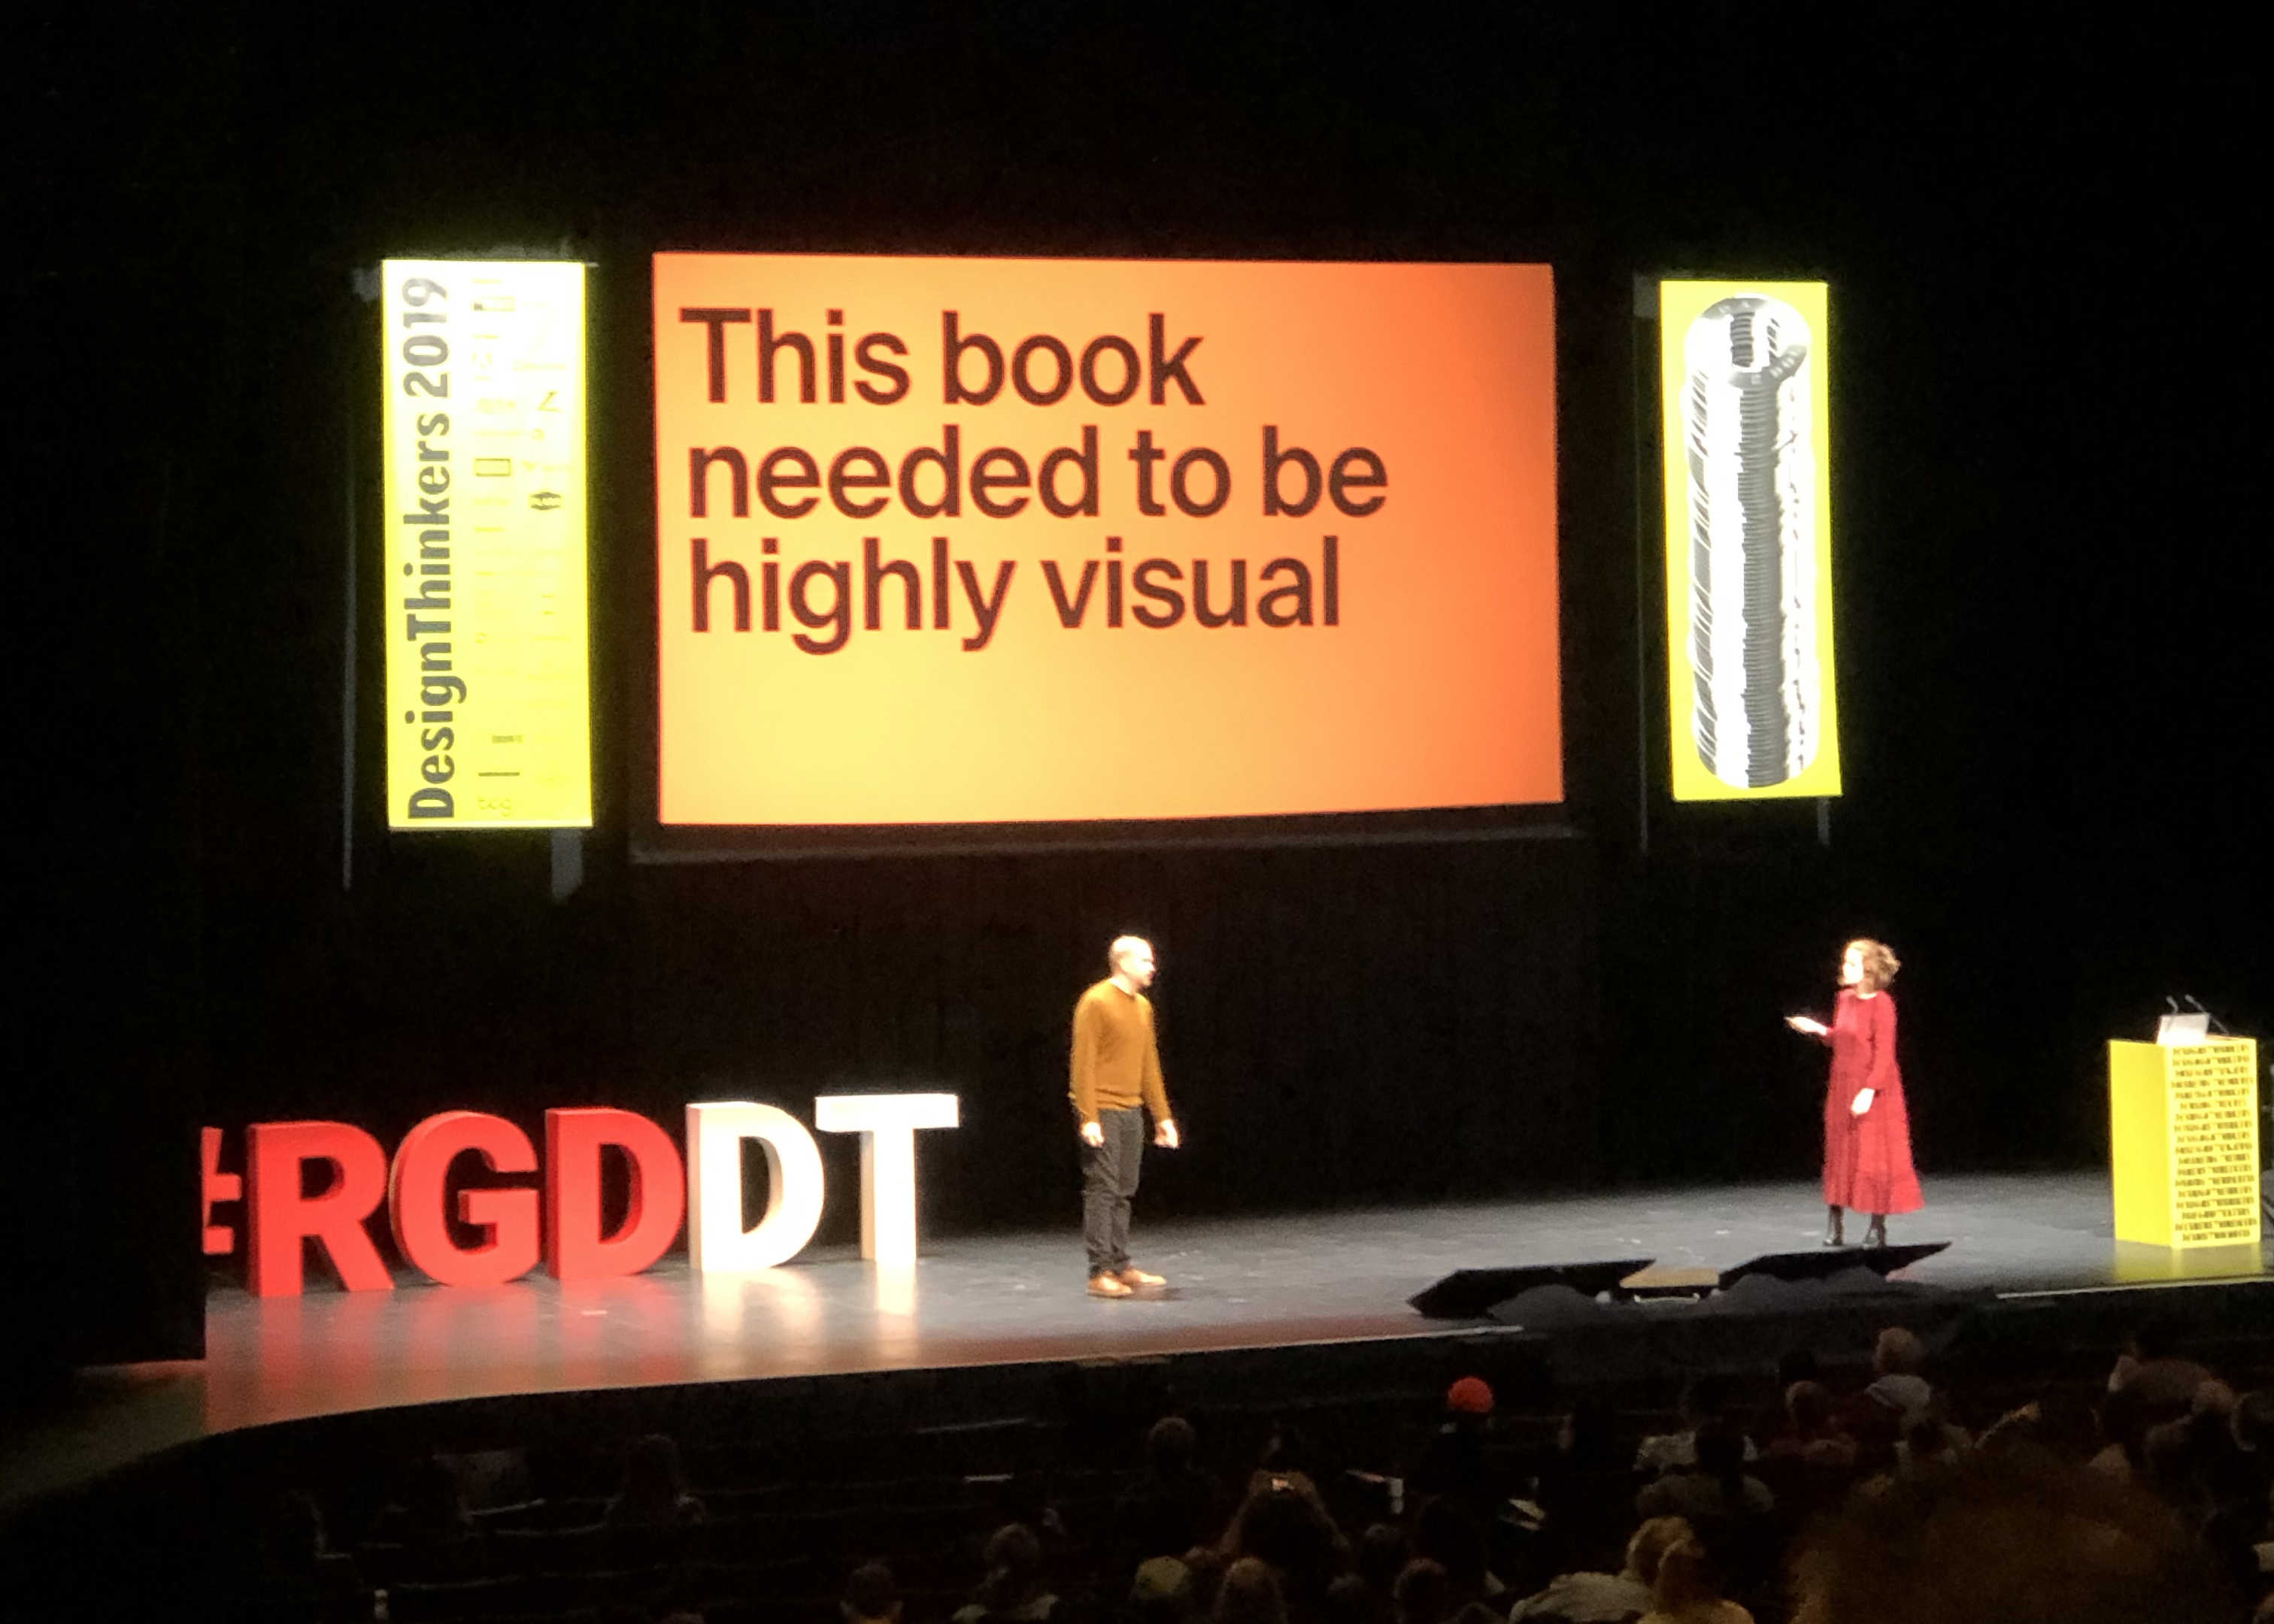 Michael and Kaila Jacques' presentation at DesignThinkers 2019